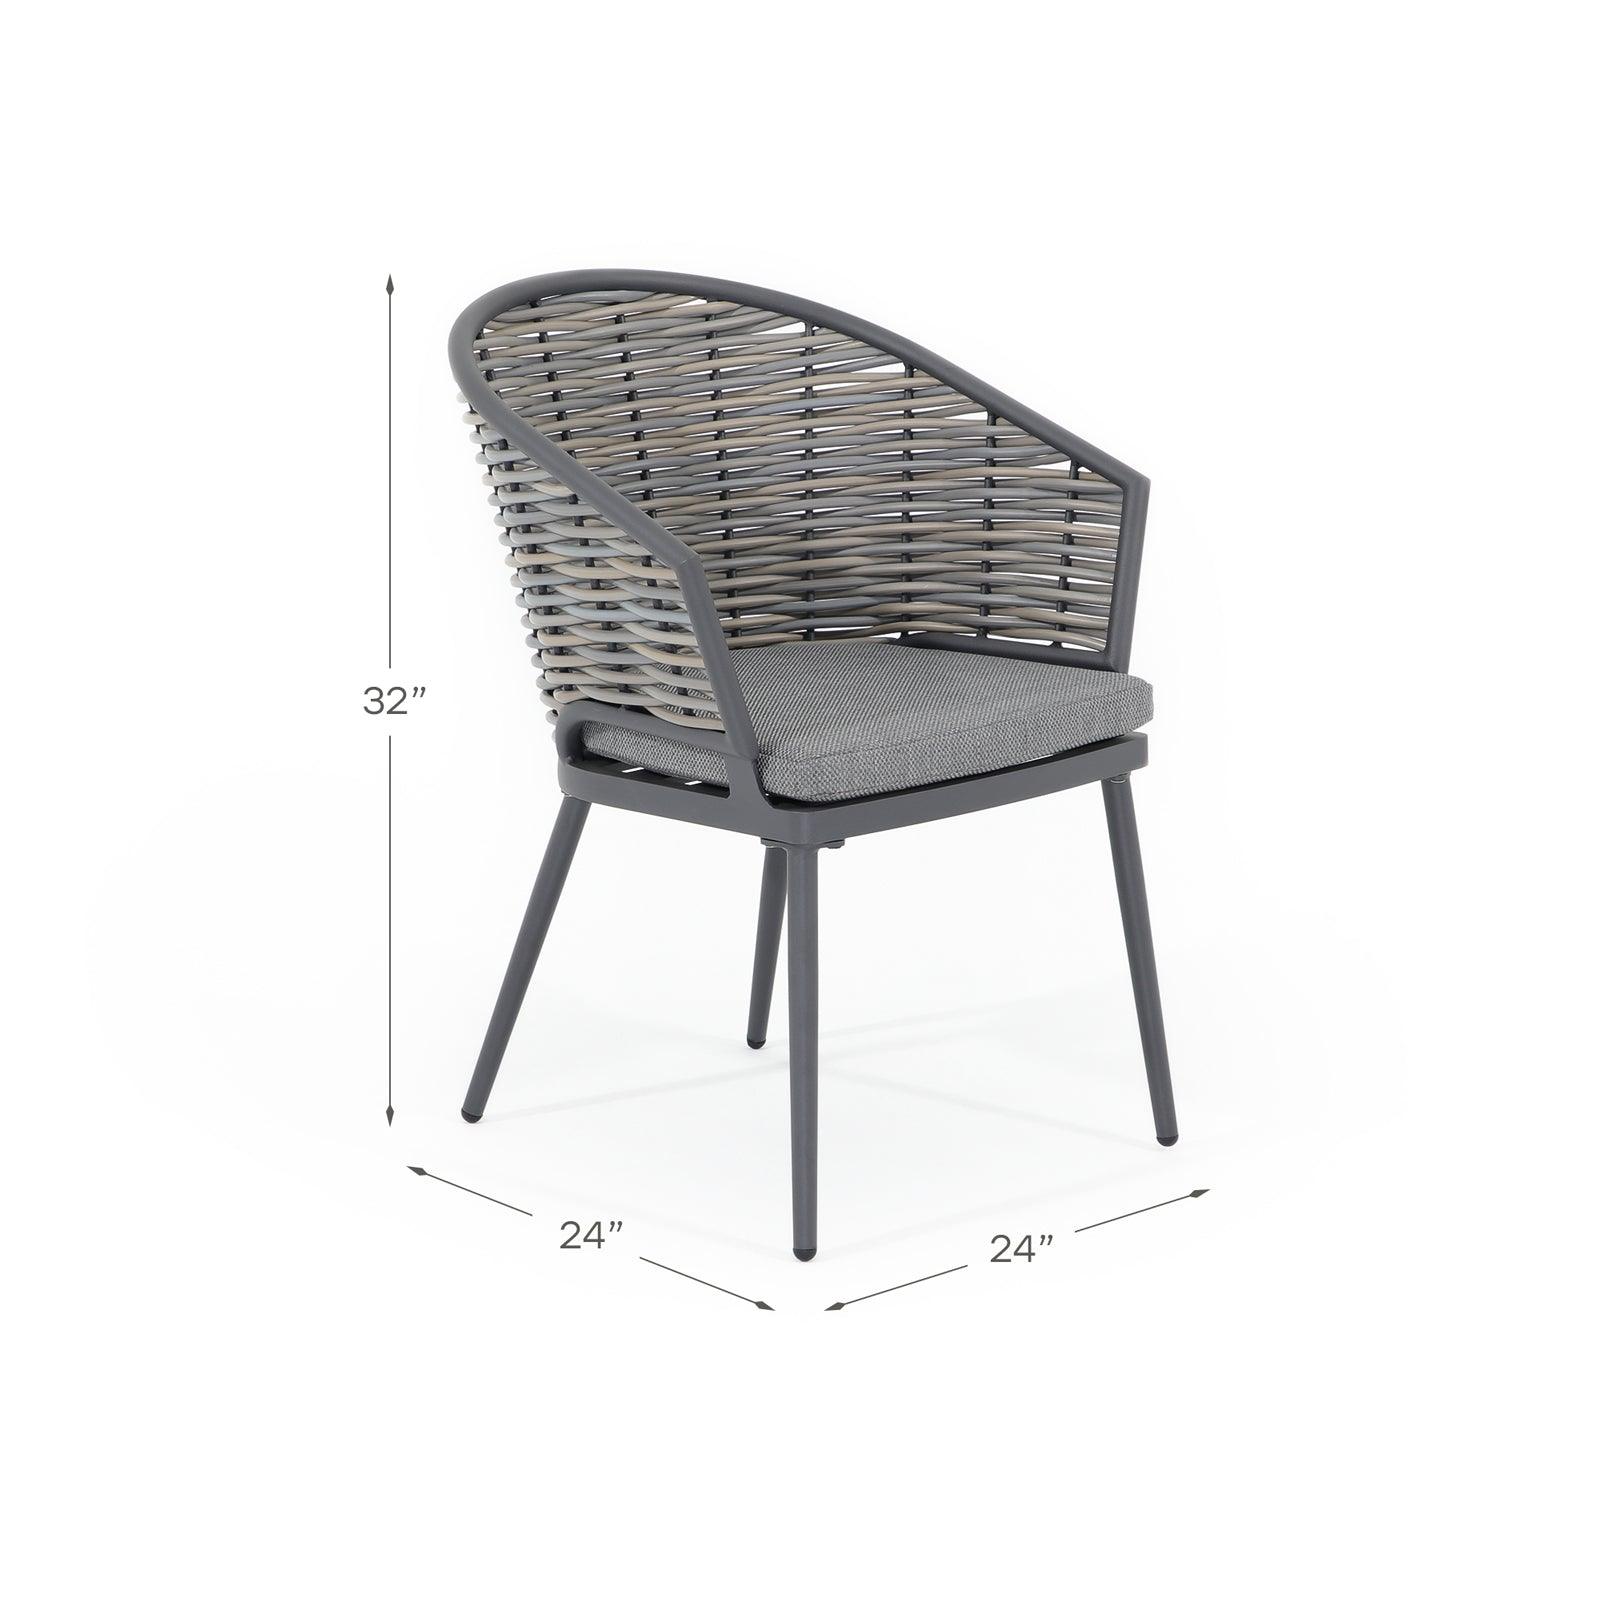 Burano Grey wicker outdoor Dining chair with aluminum frame, grey cushions, Dimension - Jardina Furniture